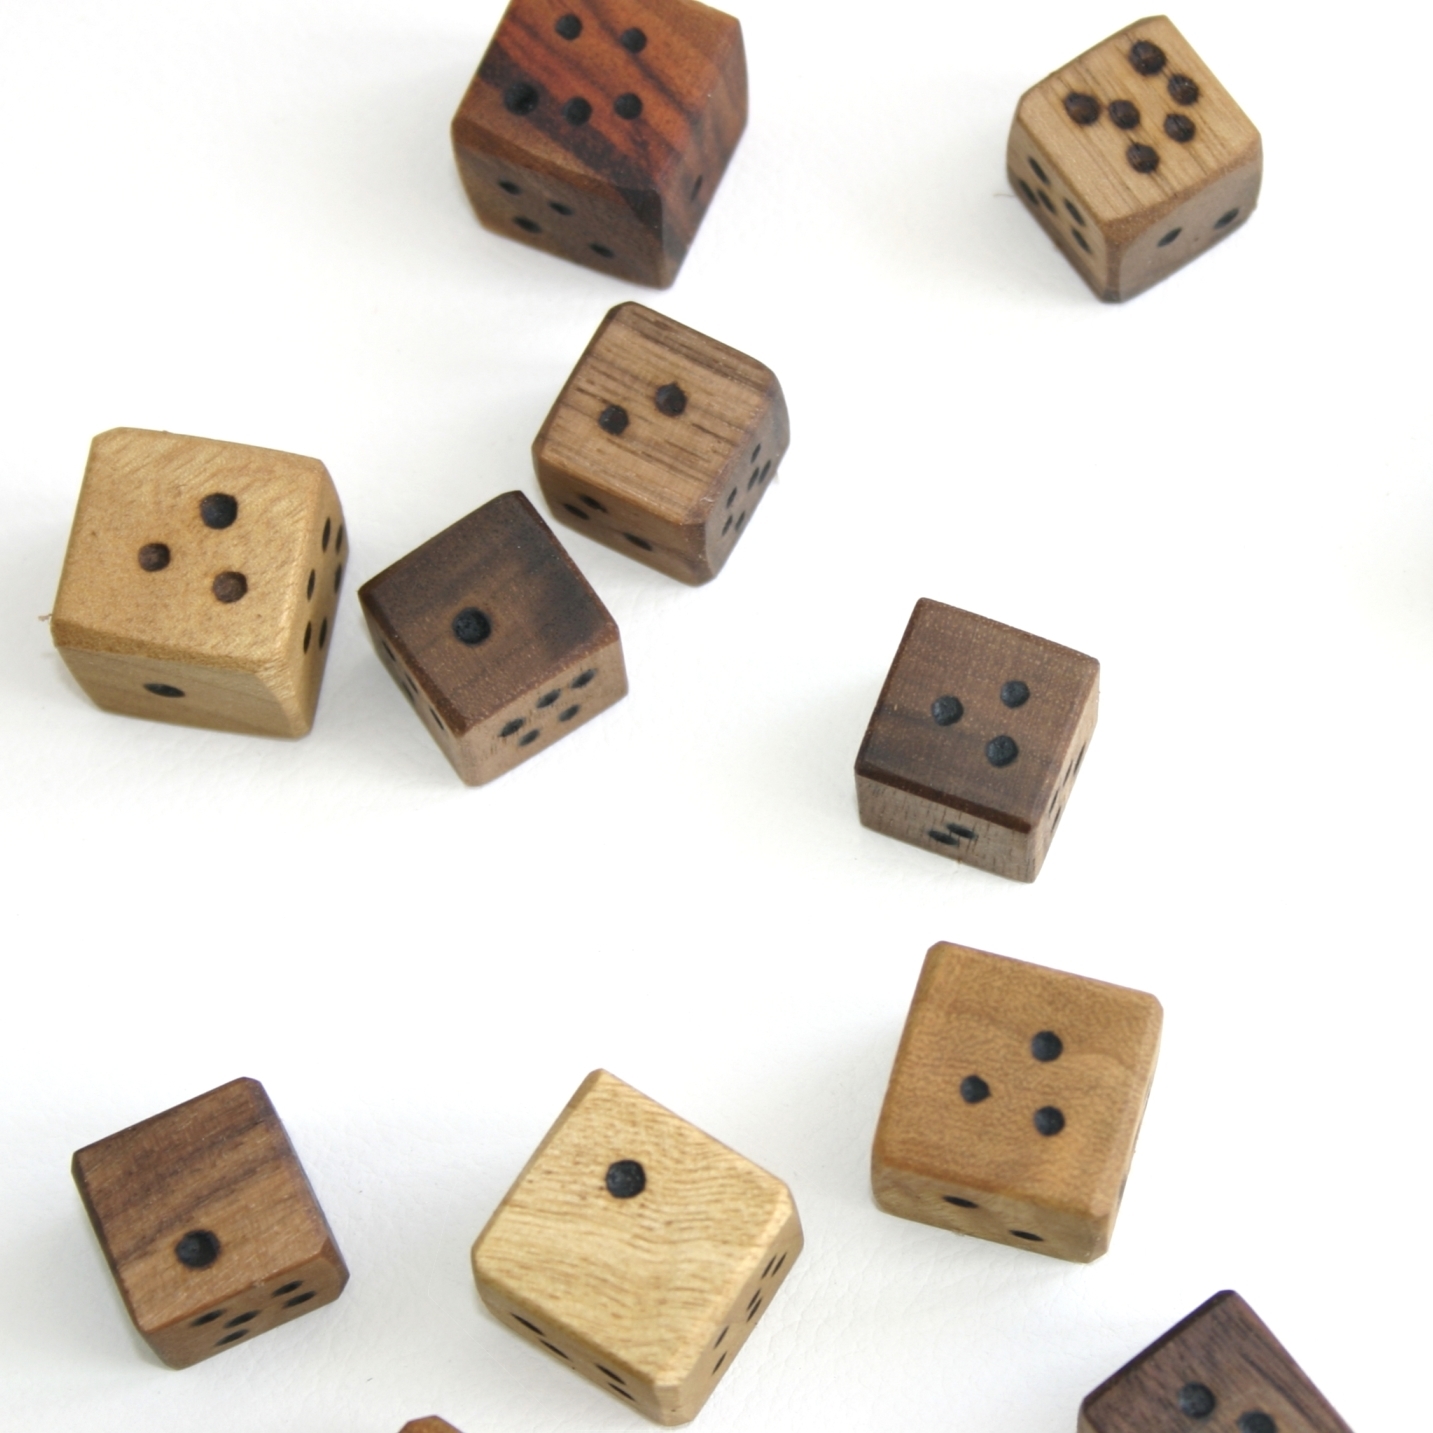 Noppa dice for Son of Martin